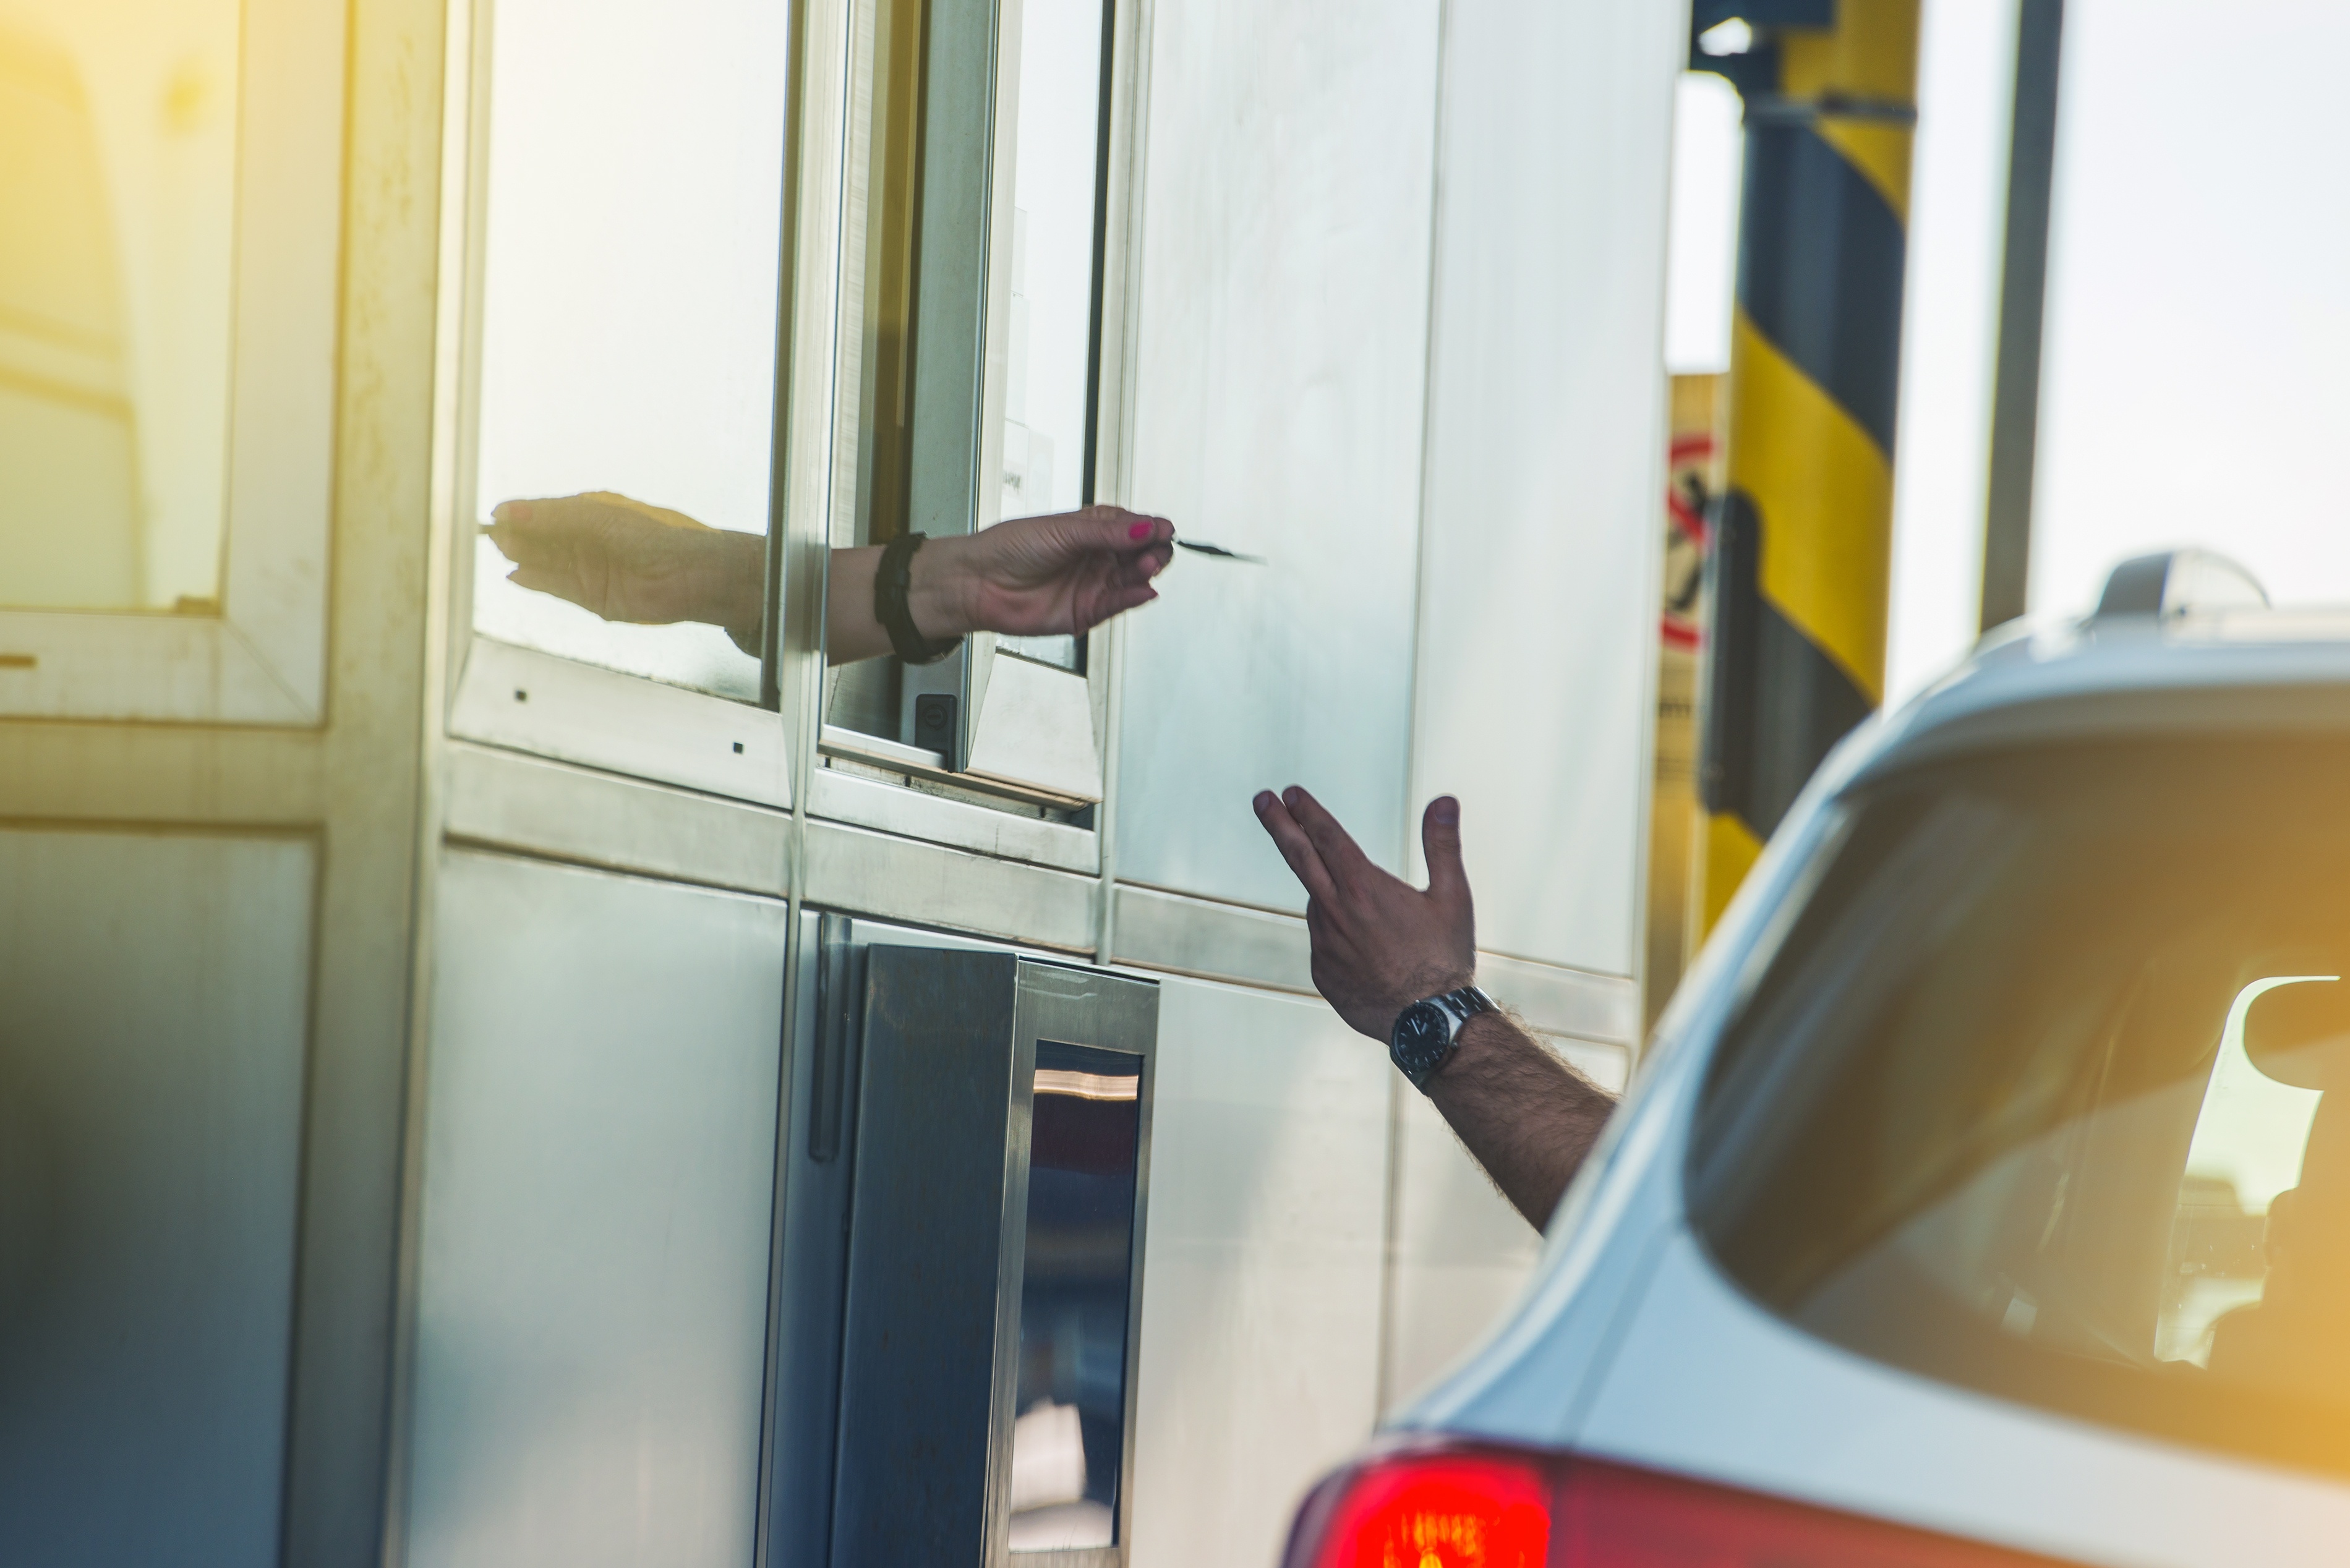 A car driver pays toll fees at a highway booth.